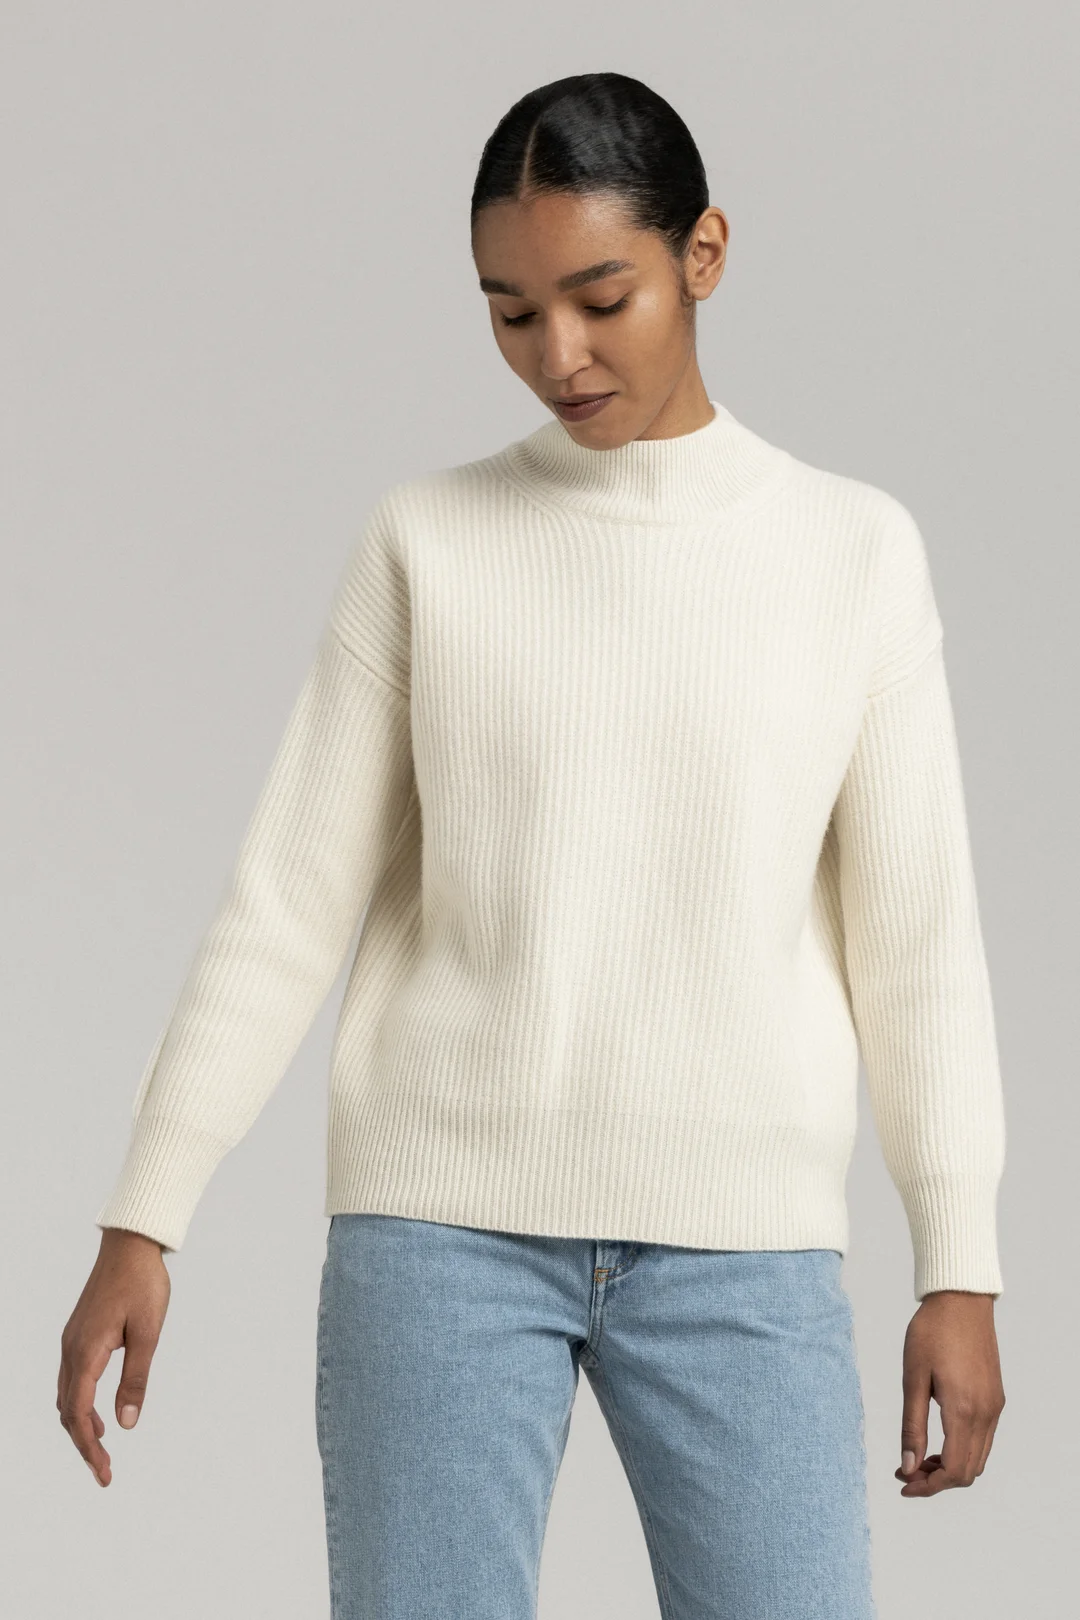 Creme Mock Neck Sweater | 100% Recycled Wool - ASKET